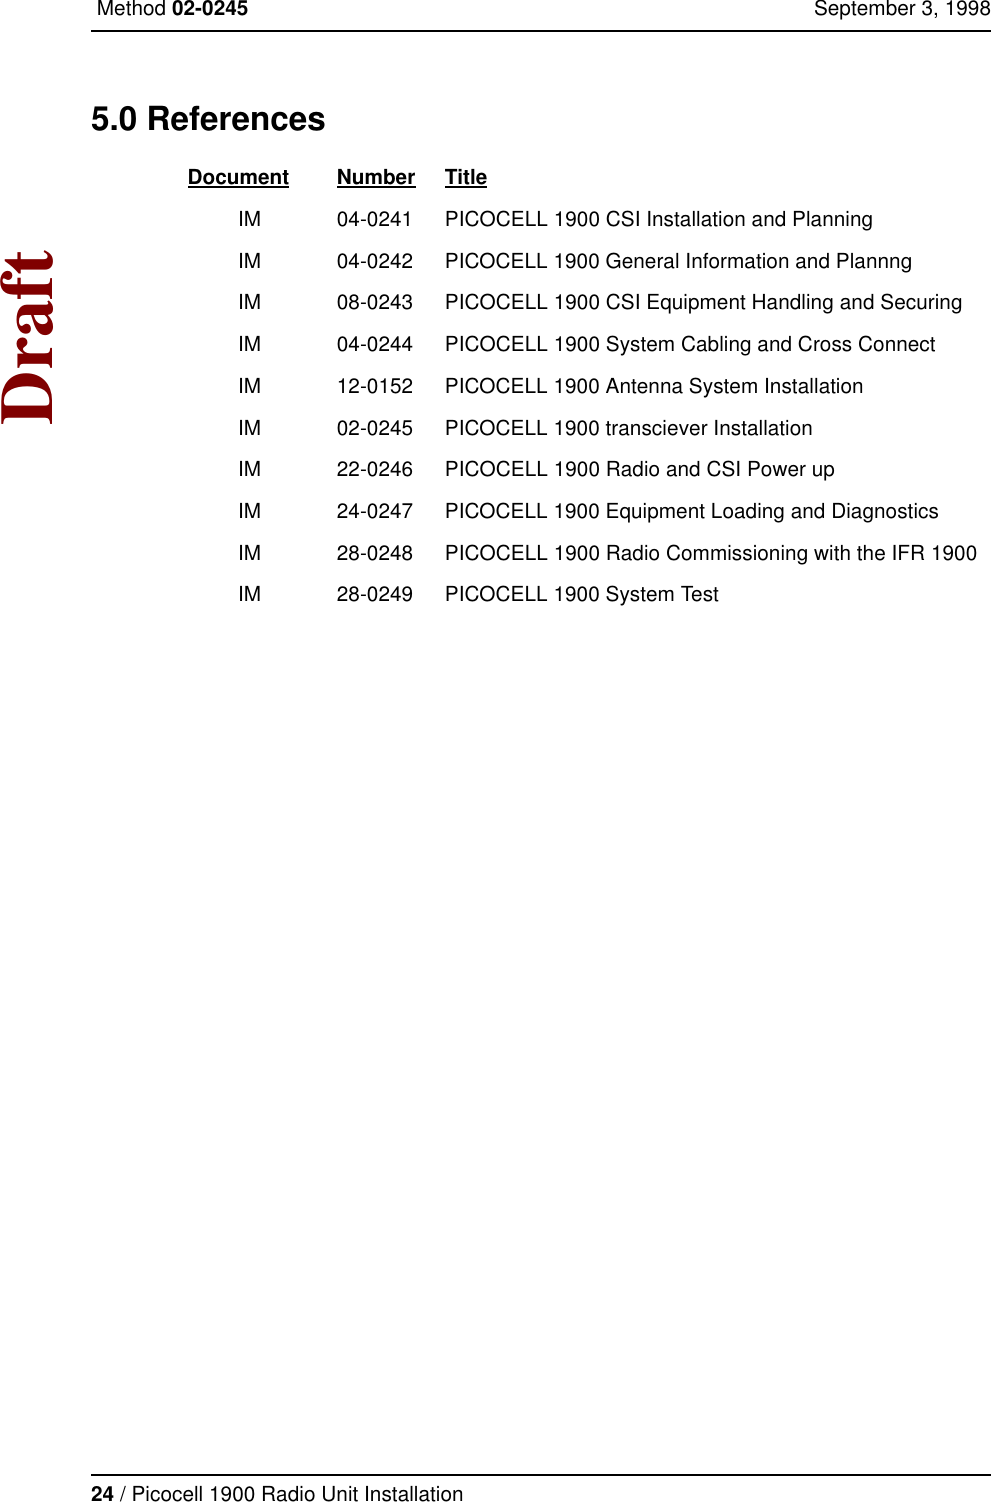 24 / Picocell 1900 Radio Unit Installation Method 02-0245 September 3, 1998Draft5.0 References    Document Number TitleIM 04-0241 PICOCELL 1900 CSI Installation and PlanningIM 04-0242 PICOCELL 1900 General Information and PlannngIM 08-0243 PICOCELL 1900 CSI Equipment Handling and SecuringIM 04-0244 PICOCELL 1900 System Cabling and Cross ConnectIM 12-0152 PICOCELL 1900 Antenna System InstallationIM 02-0245 PICOCELL 1900 transciever InstallationIM 22-0246 PICOCELL 1900 Radio and CSI Power upIM 24-0247 PICOCELL 1900 Equipment Loading and DiagnosticsIM 28-0248 PICOCELL 1900 Radio Commissioning with the IFR 1900IM 28-0249 PICOCELL 1900 System Test